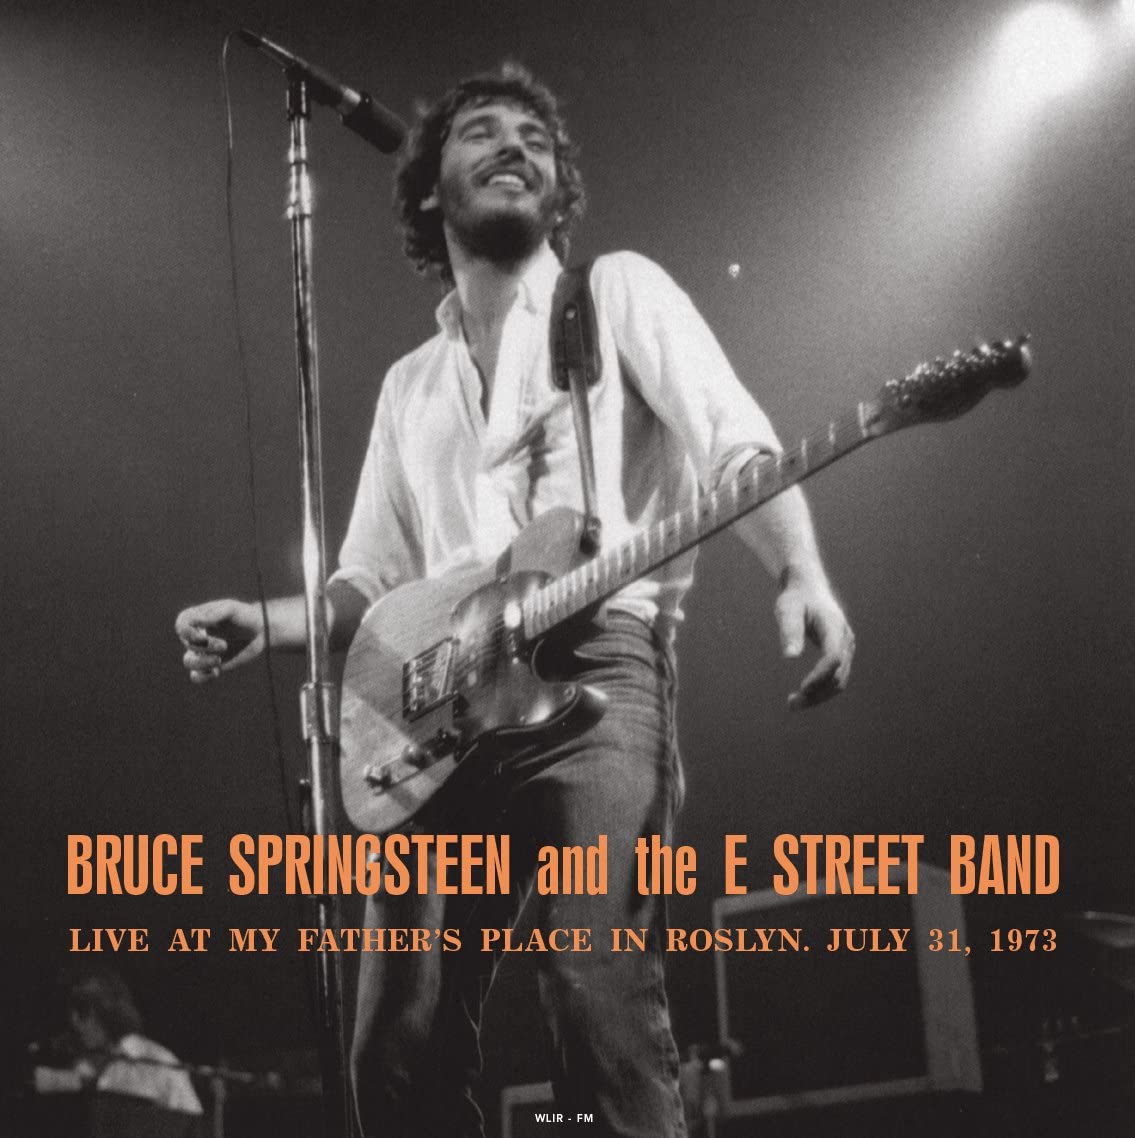 Bruce Springsteen & The E Street Band | Live At My Father's Place In Roslyn Ny July 31 1973 Wlir-Fm (Blue Vinyl) | Vinyl